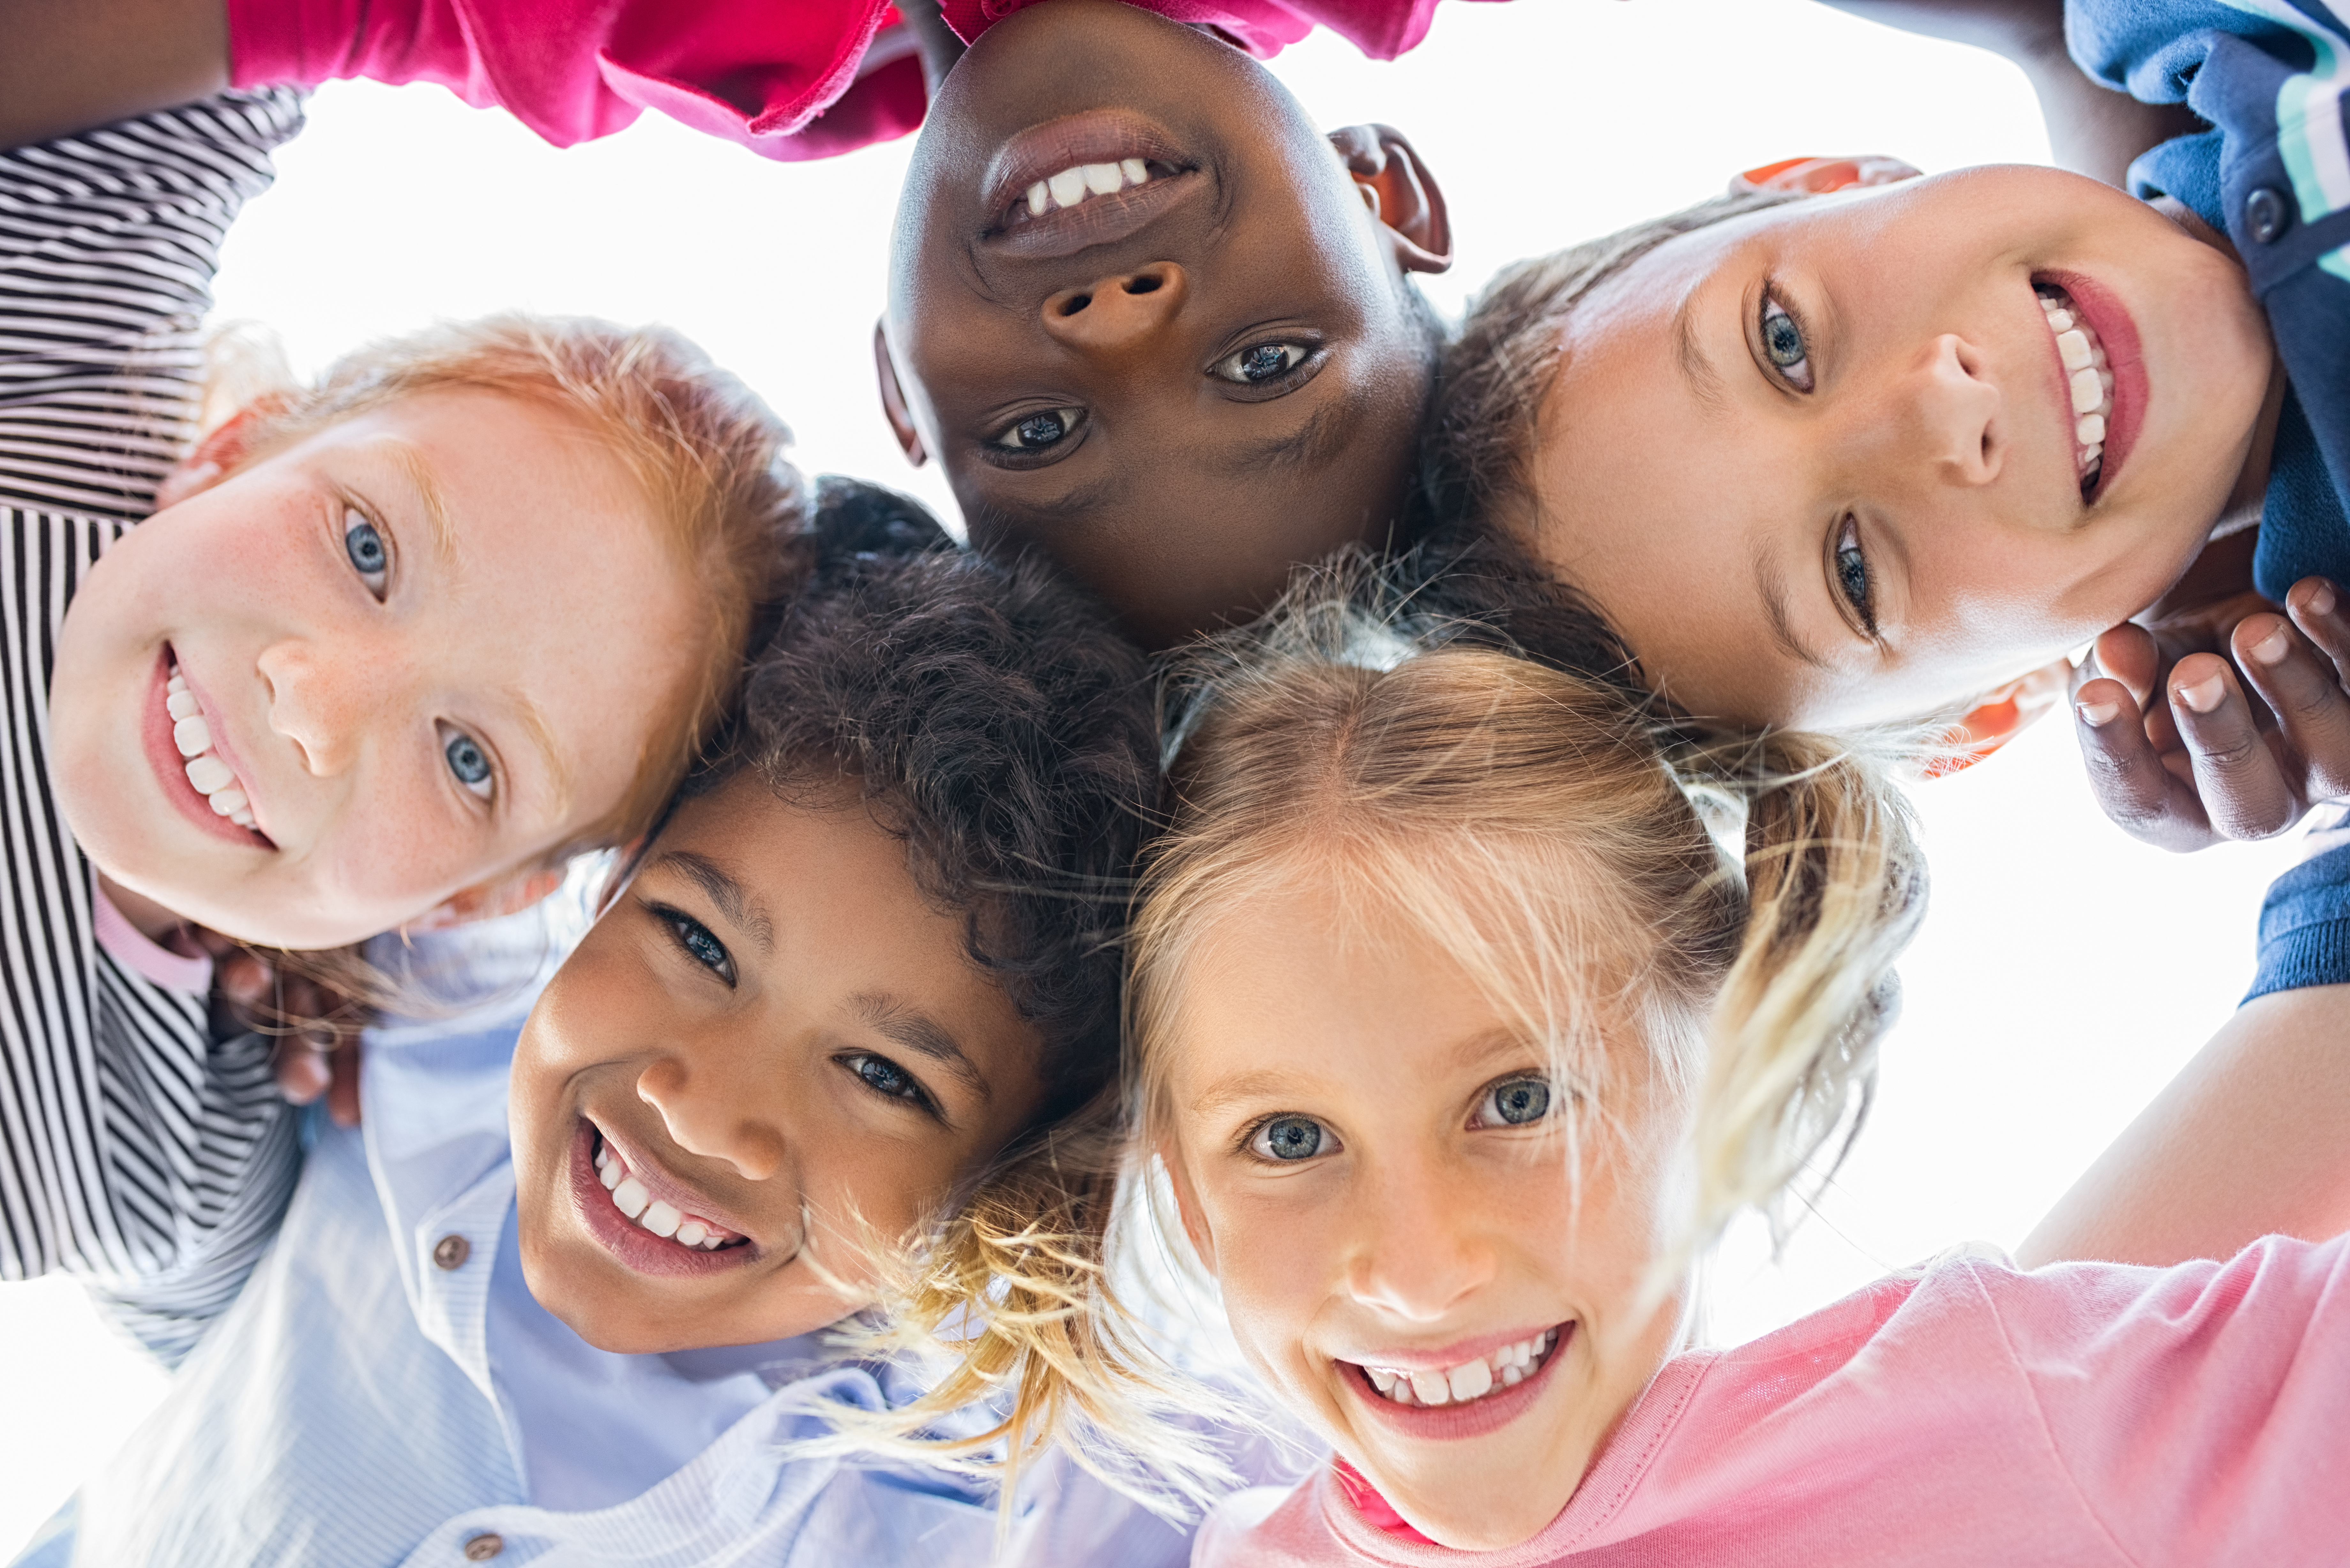 Closeup face of happy multiethnic children embracing each other and smiling at camera. Team of smiling kids embracing together in a circle. Portrait of young boy and pretty girls looking at camera.